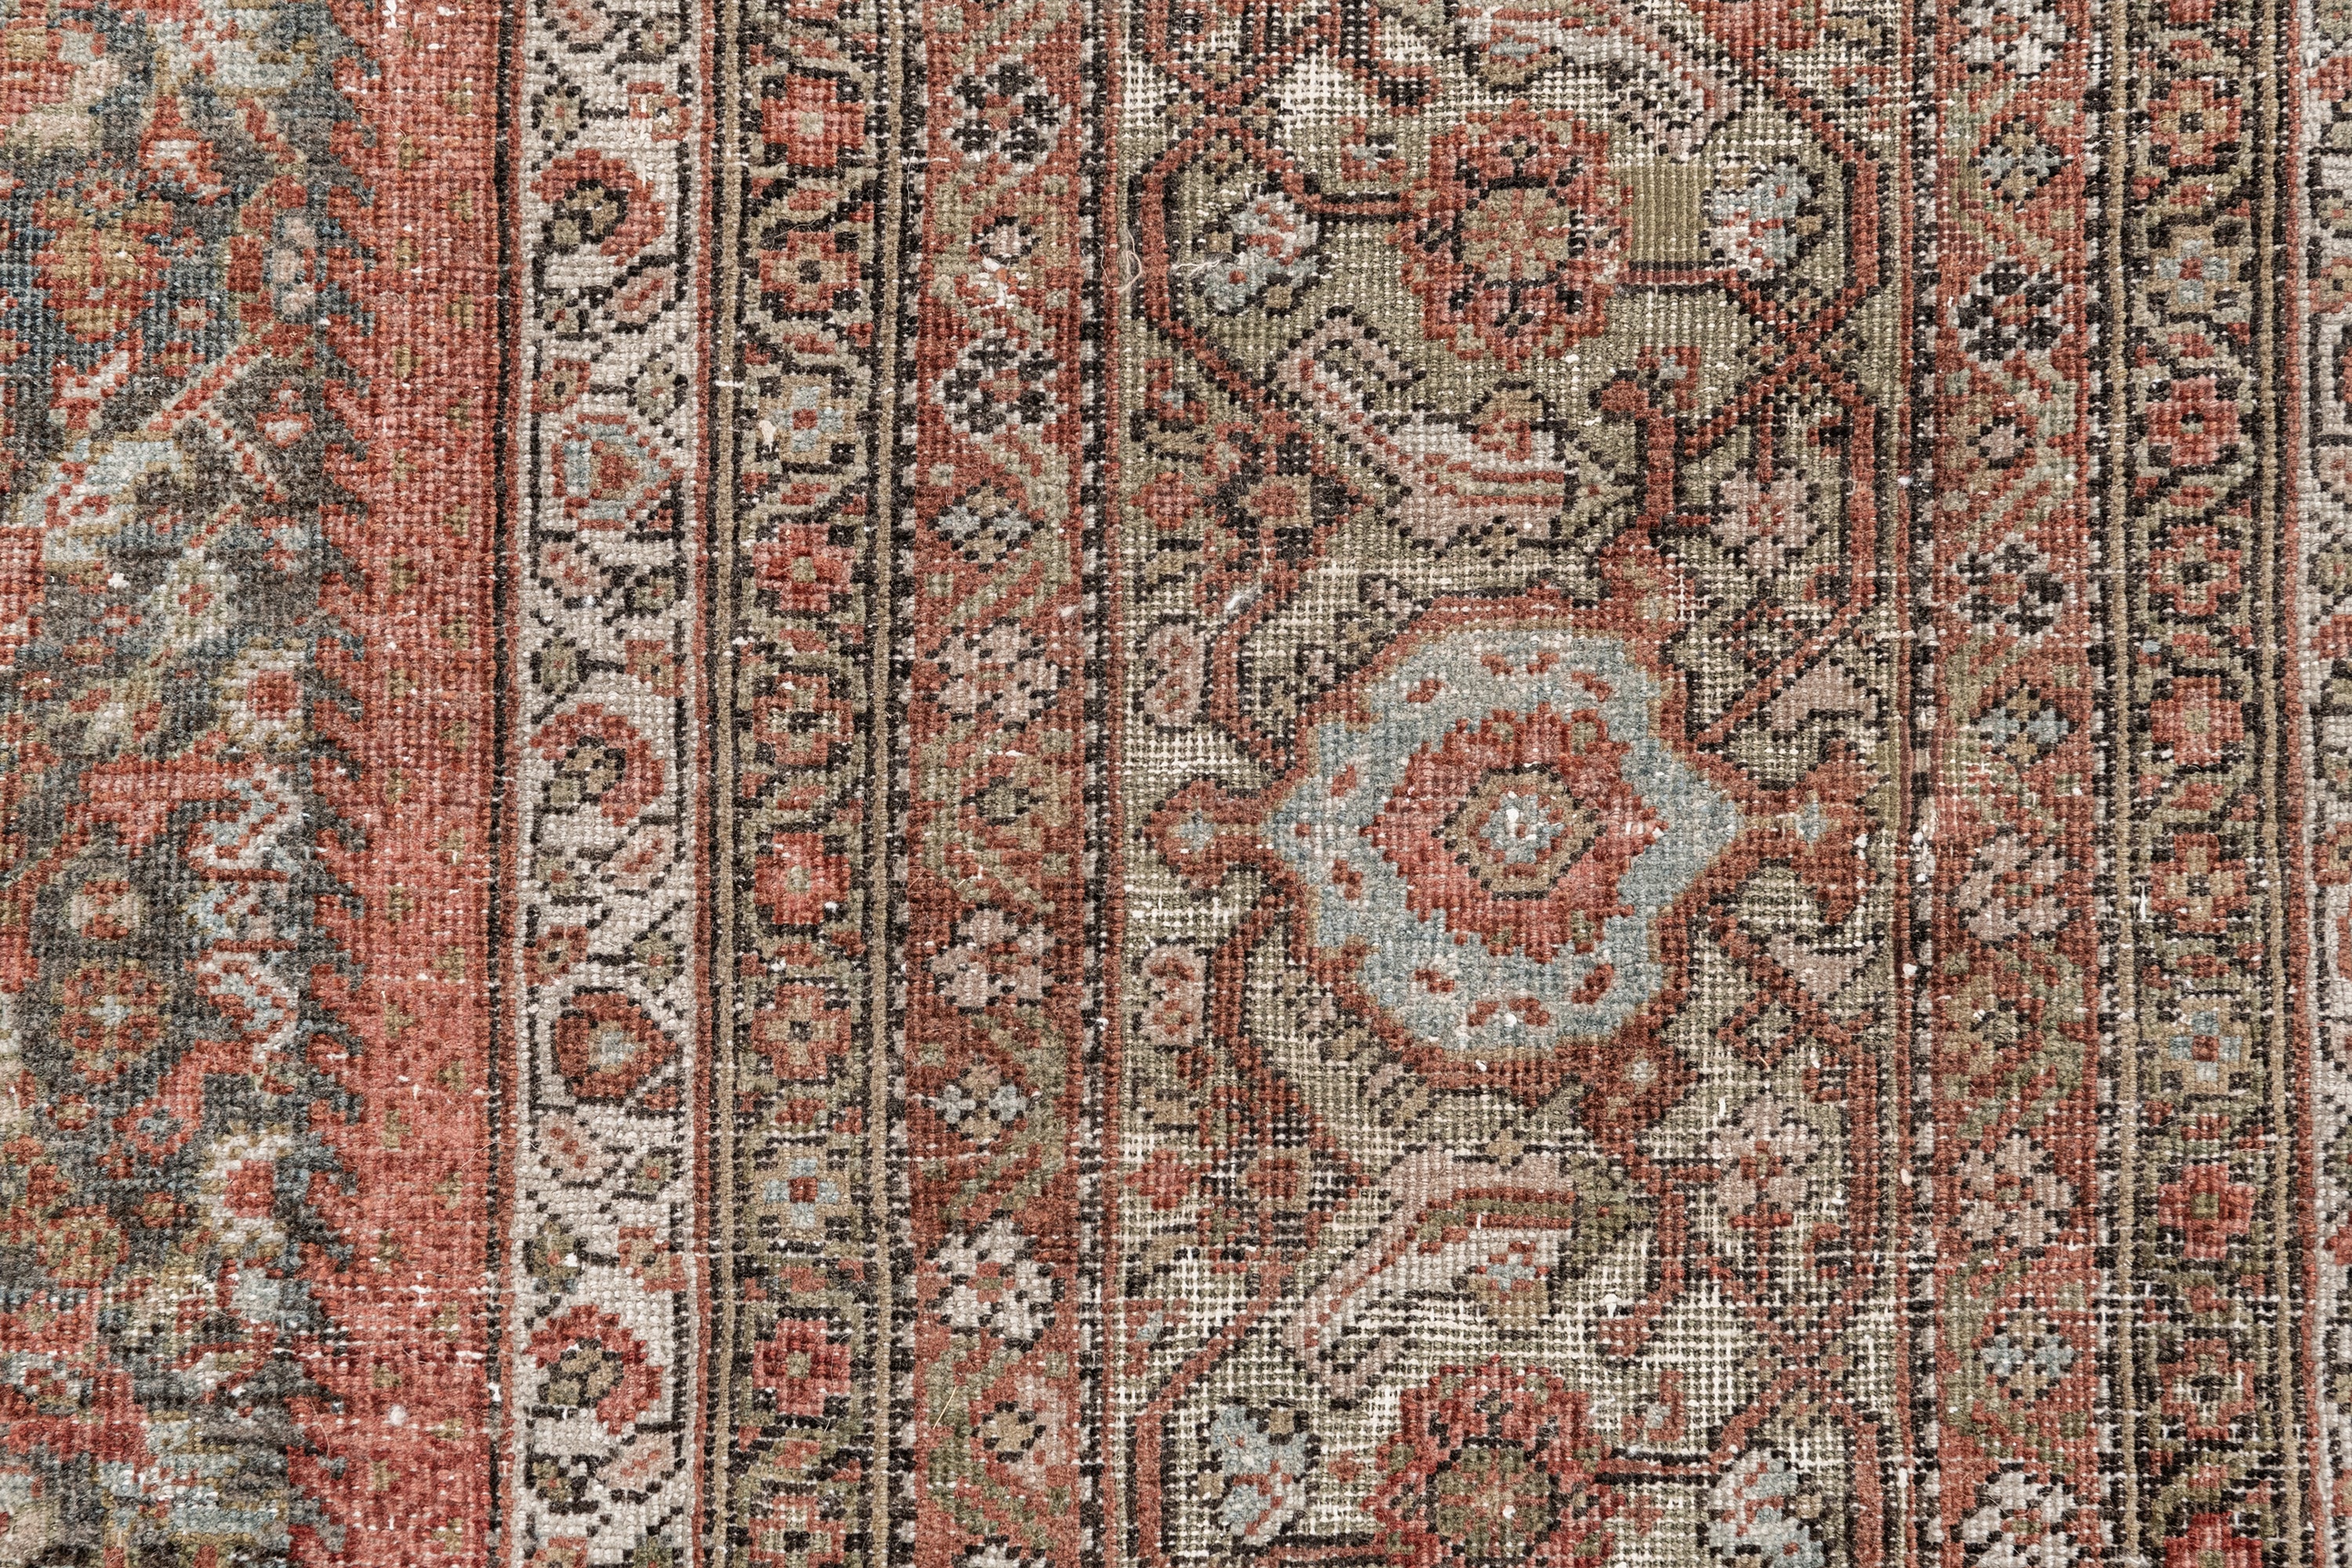 SULTANABAD RUG, AR31268, WEST PERSIA, 15'3" X 24'4" - thumbnail 8